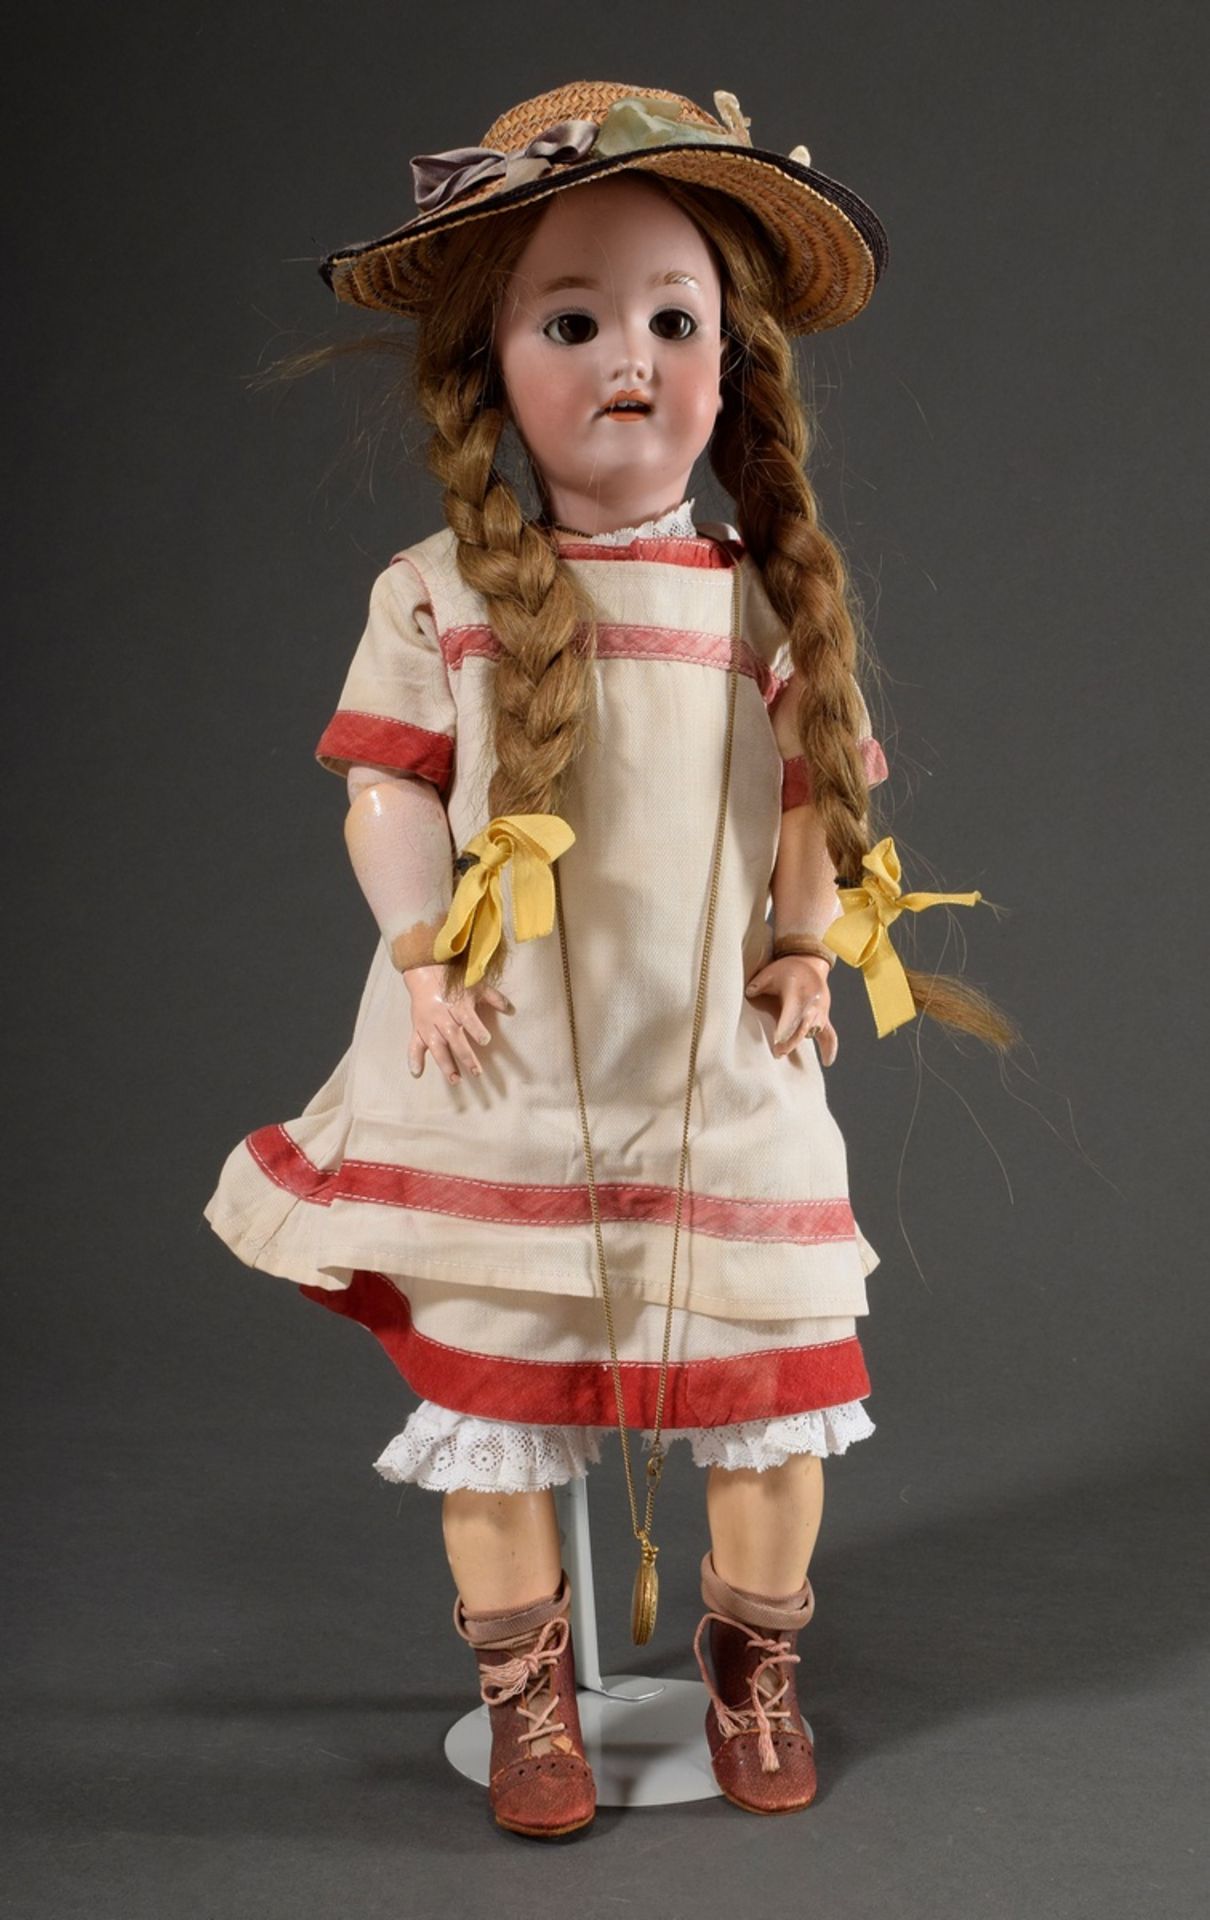 Doll with porcelain crank head and wooden limbed body, dark blond real hair wig, brown glass sleepi